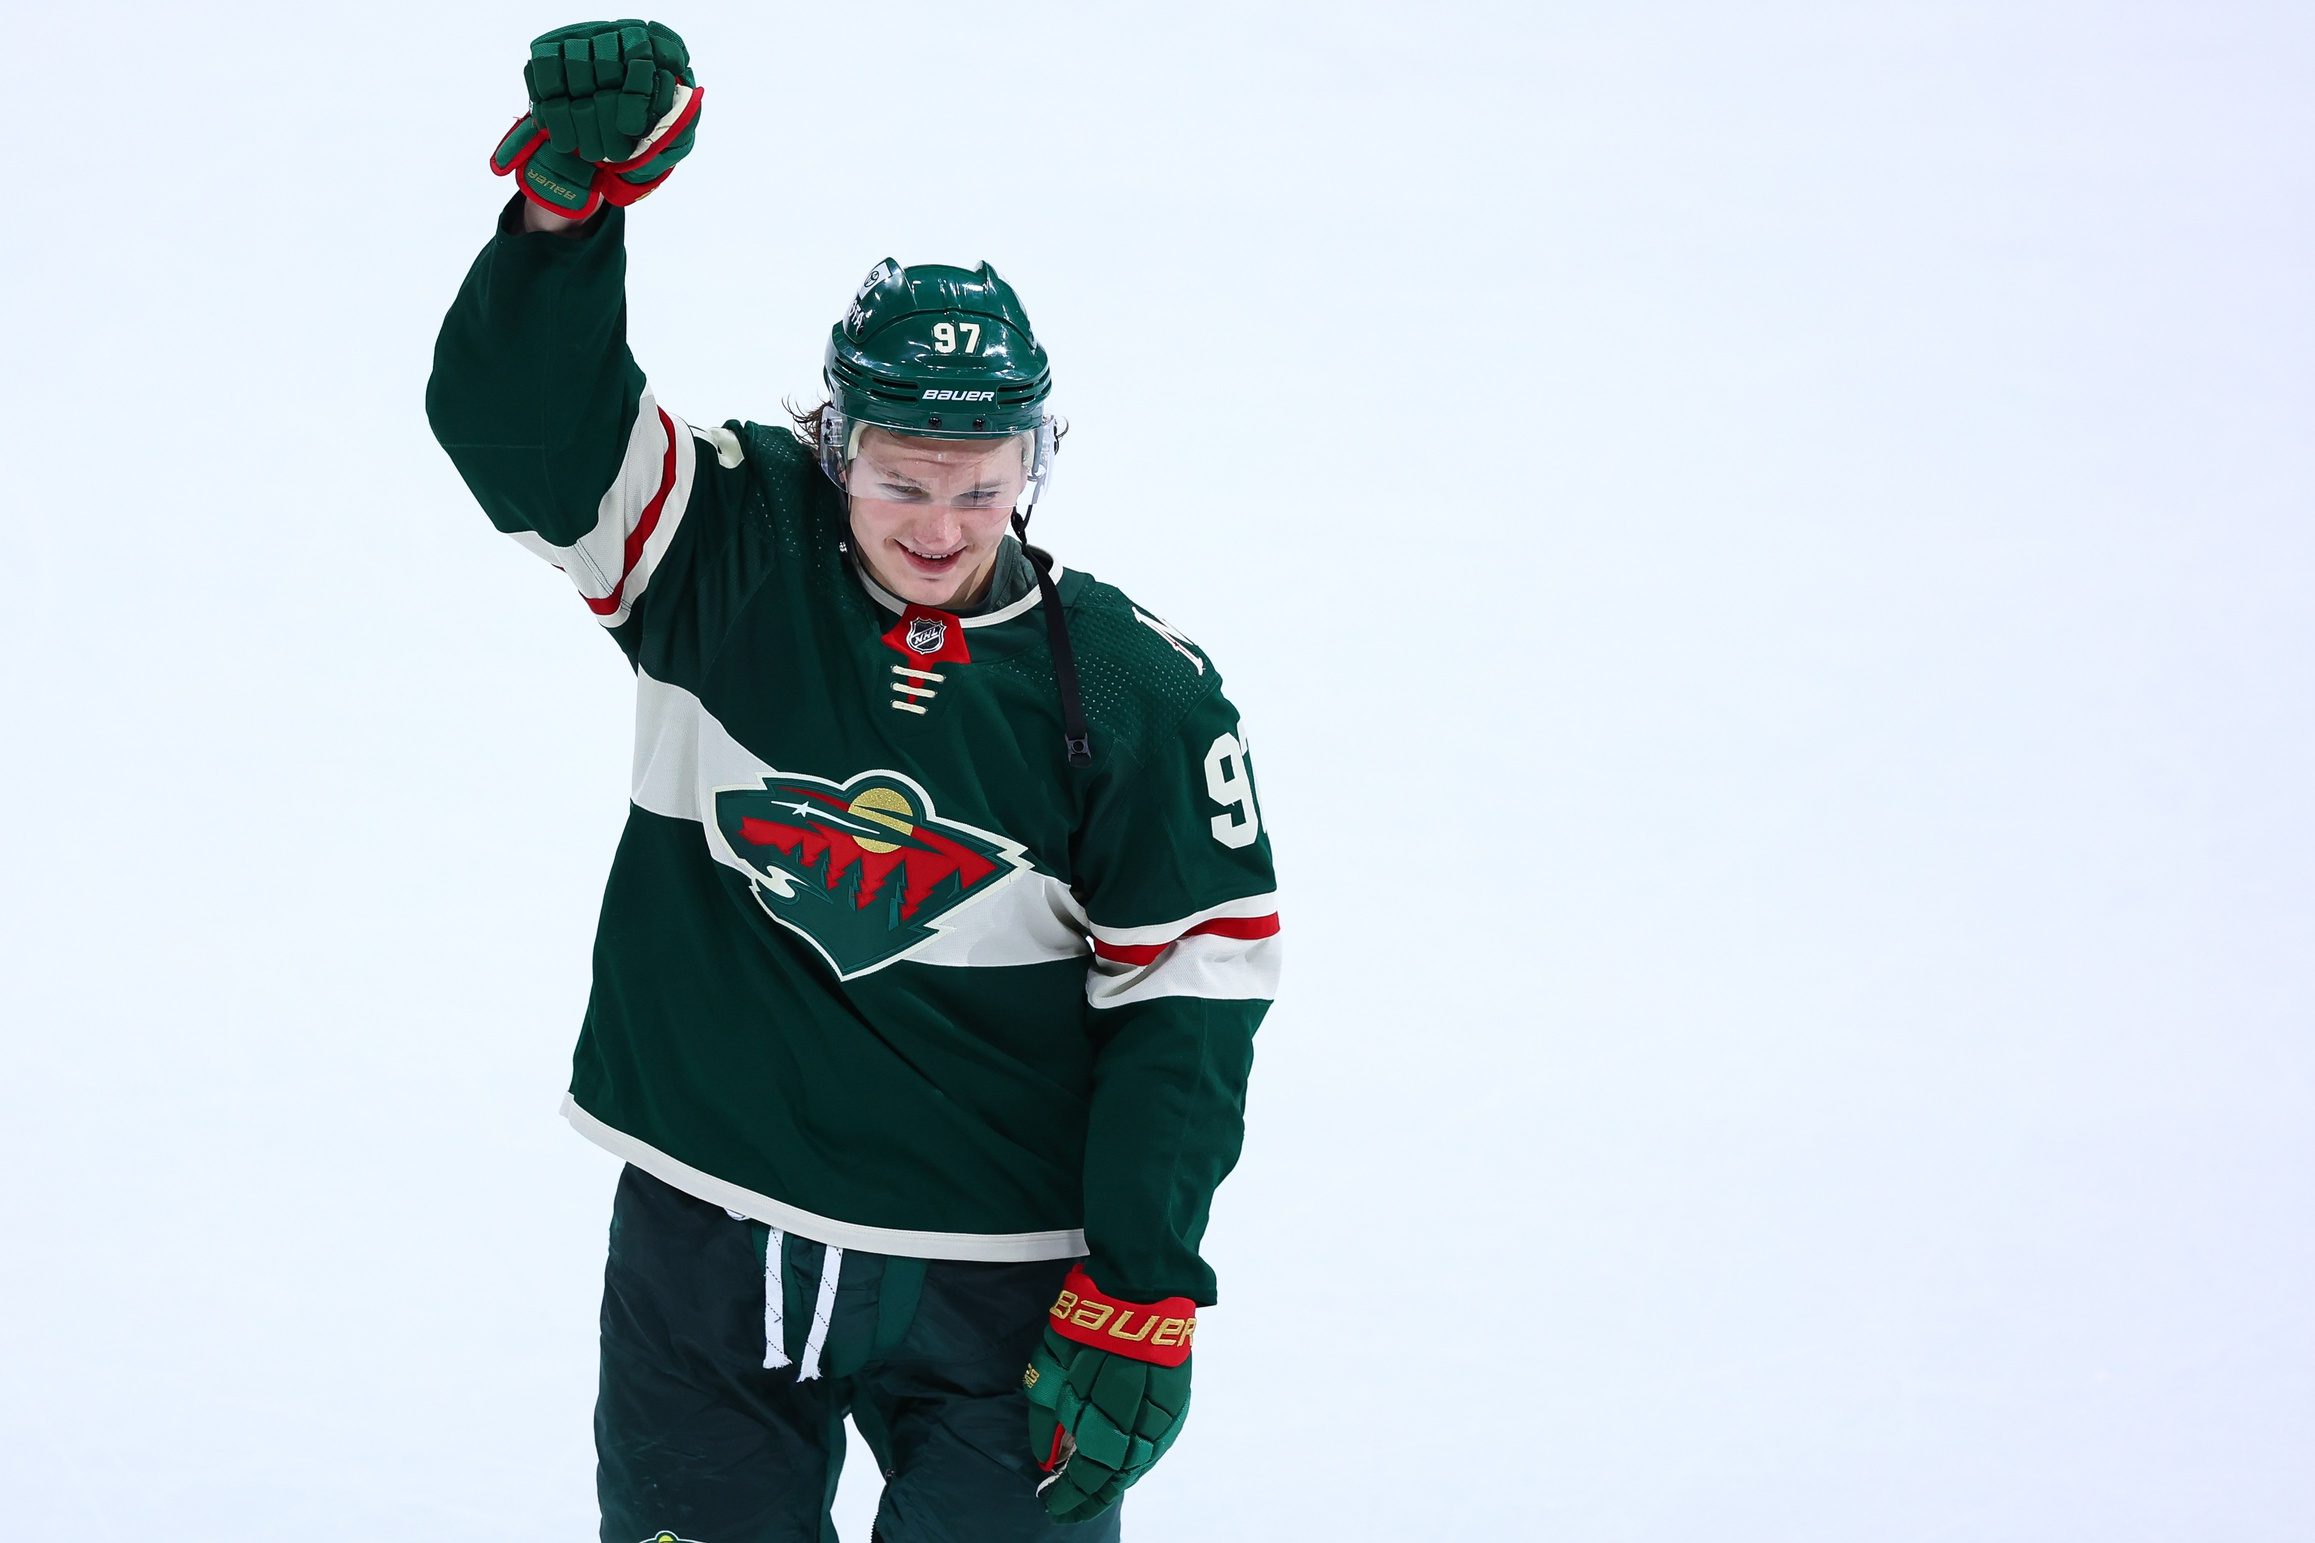 Top prospect Kirill Kaprizov signs two-year contract with Wild